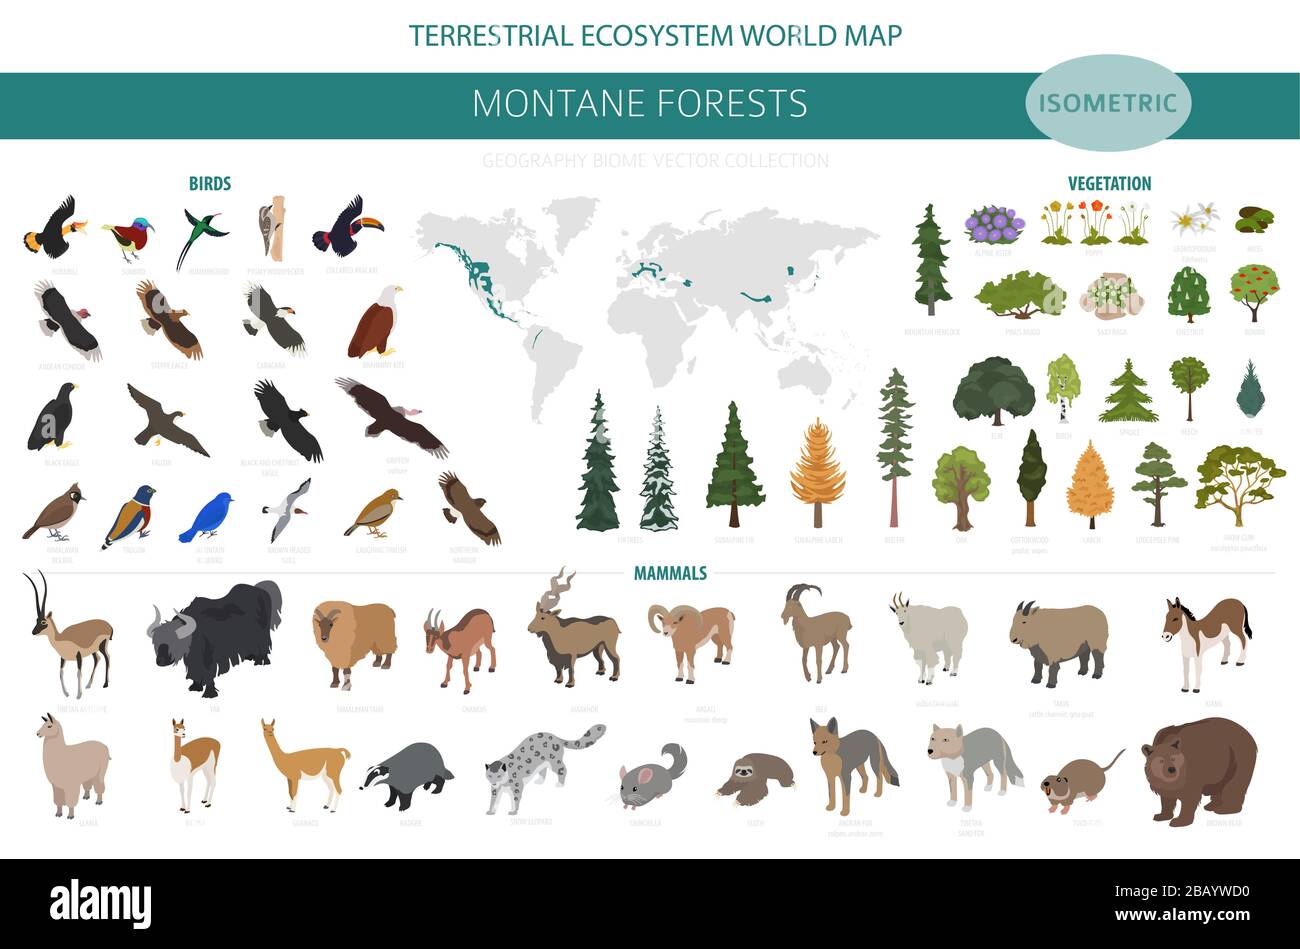 Montane forest biome, natural region infographic. Isometric version. Terrestrial ecosystem world map. Animals, birds and vegetations ecosystem design Stock Vector